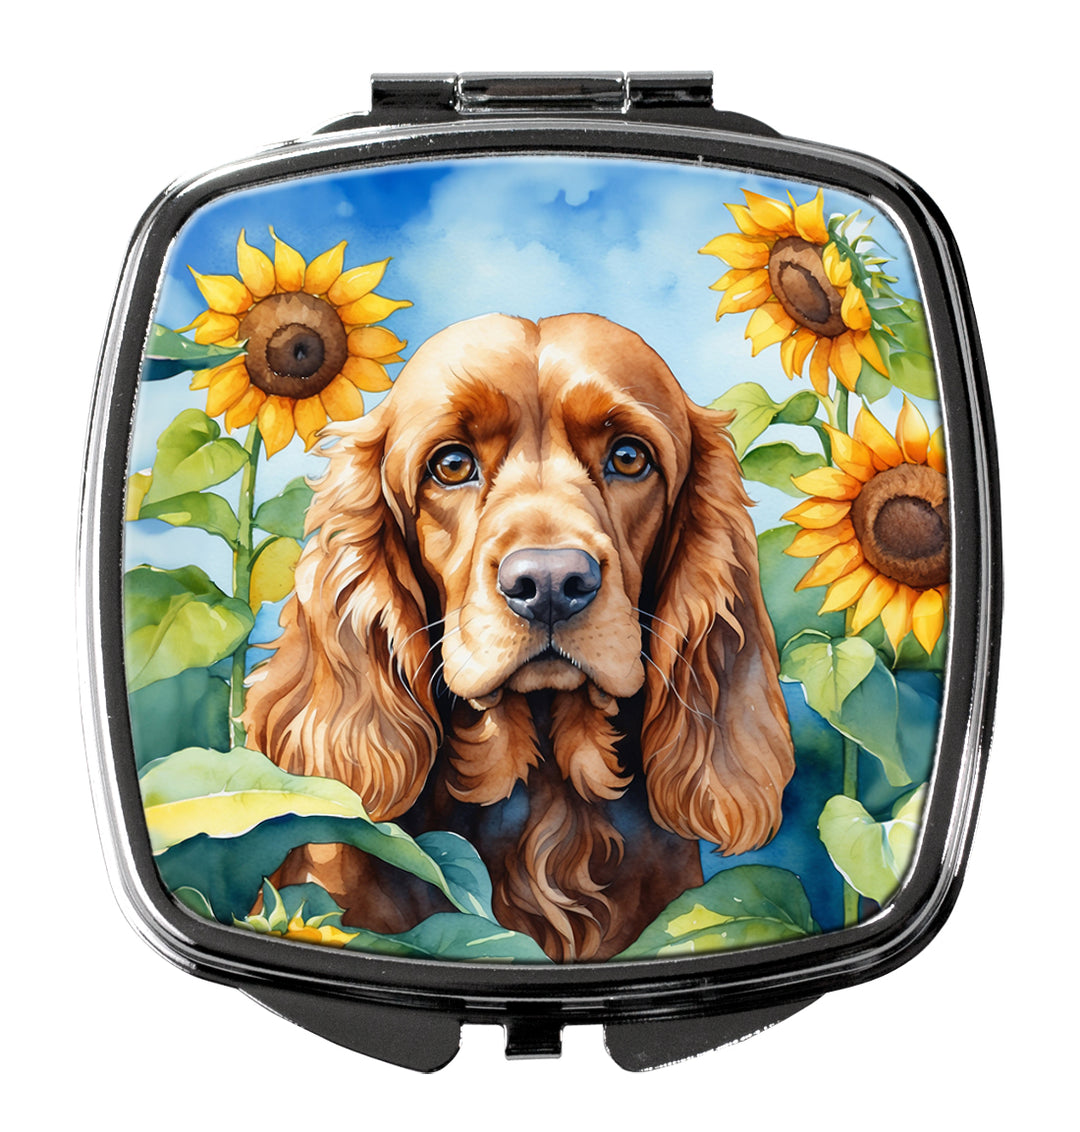 Yorkshire Terrier in Sunflowers Compact Mirror Image 11